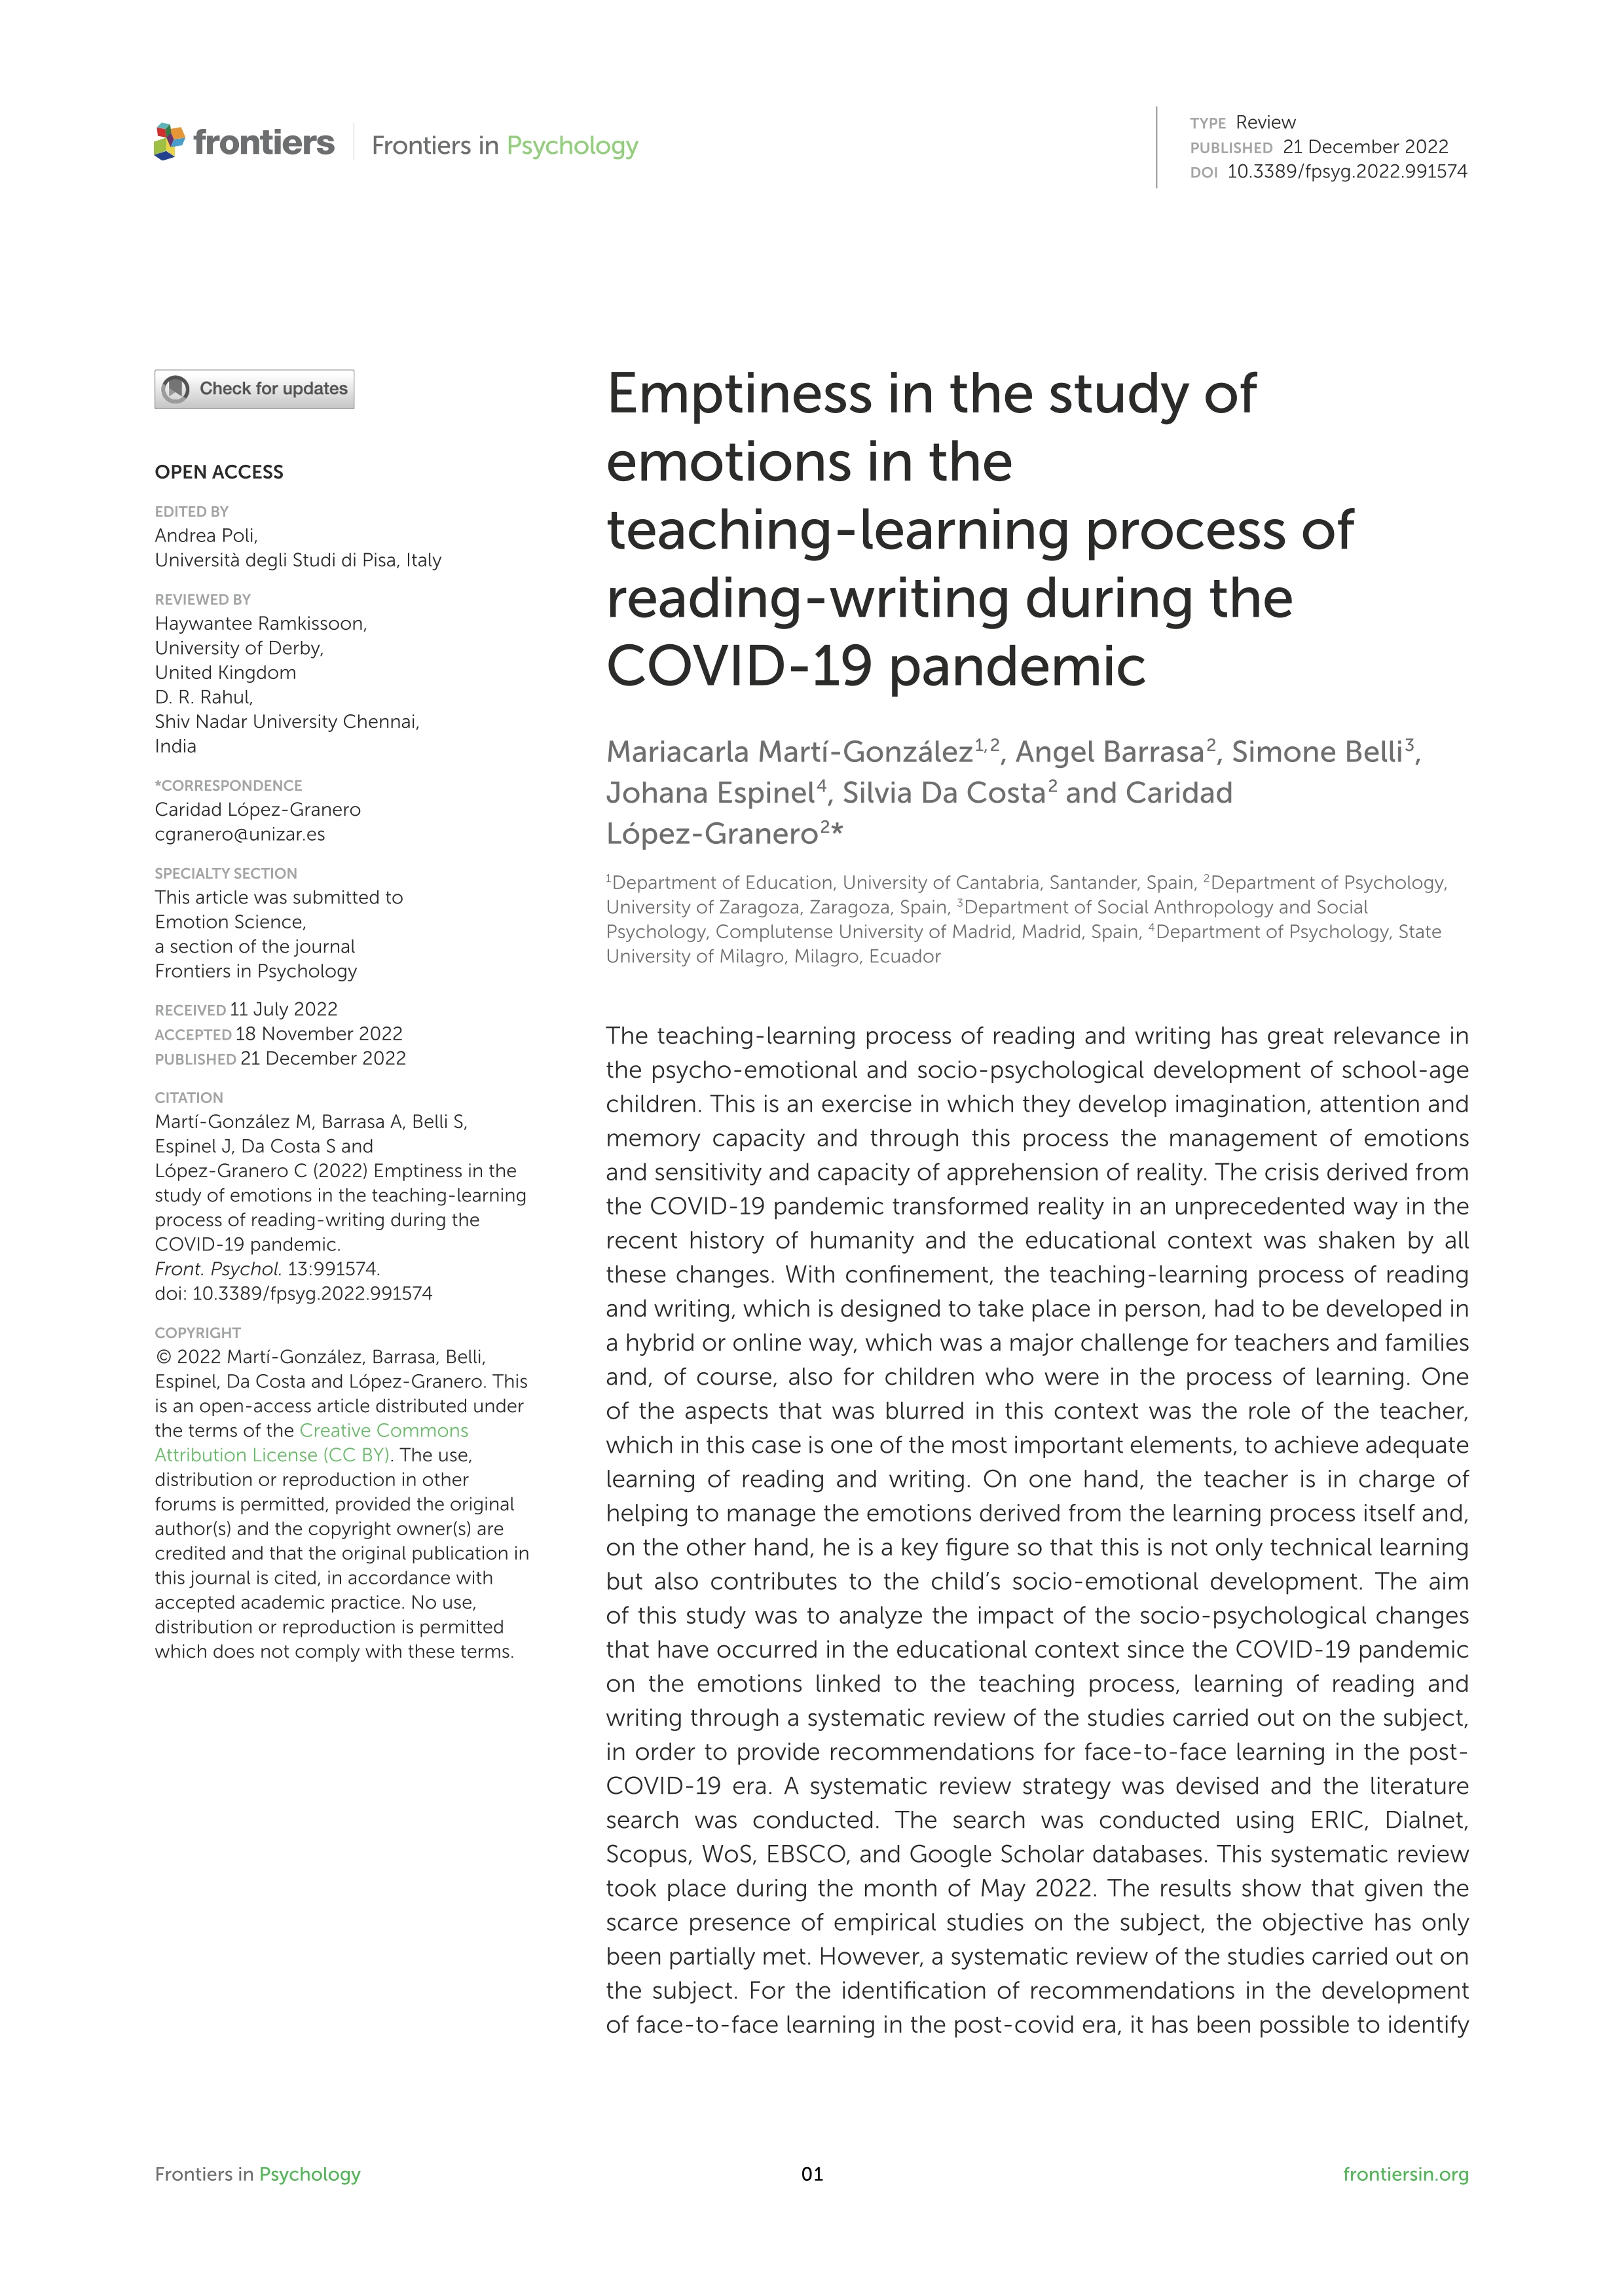 Emptiness in the study of emotions in the teaching-learning process of reading-writing during the COVID-19 pandemic